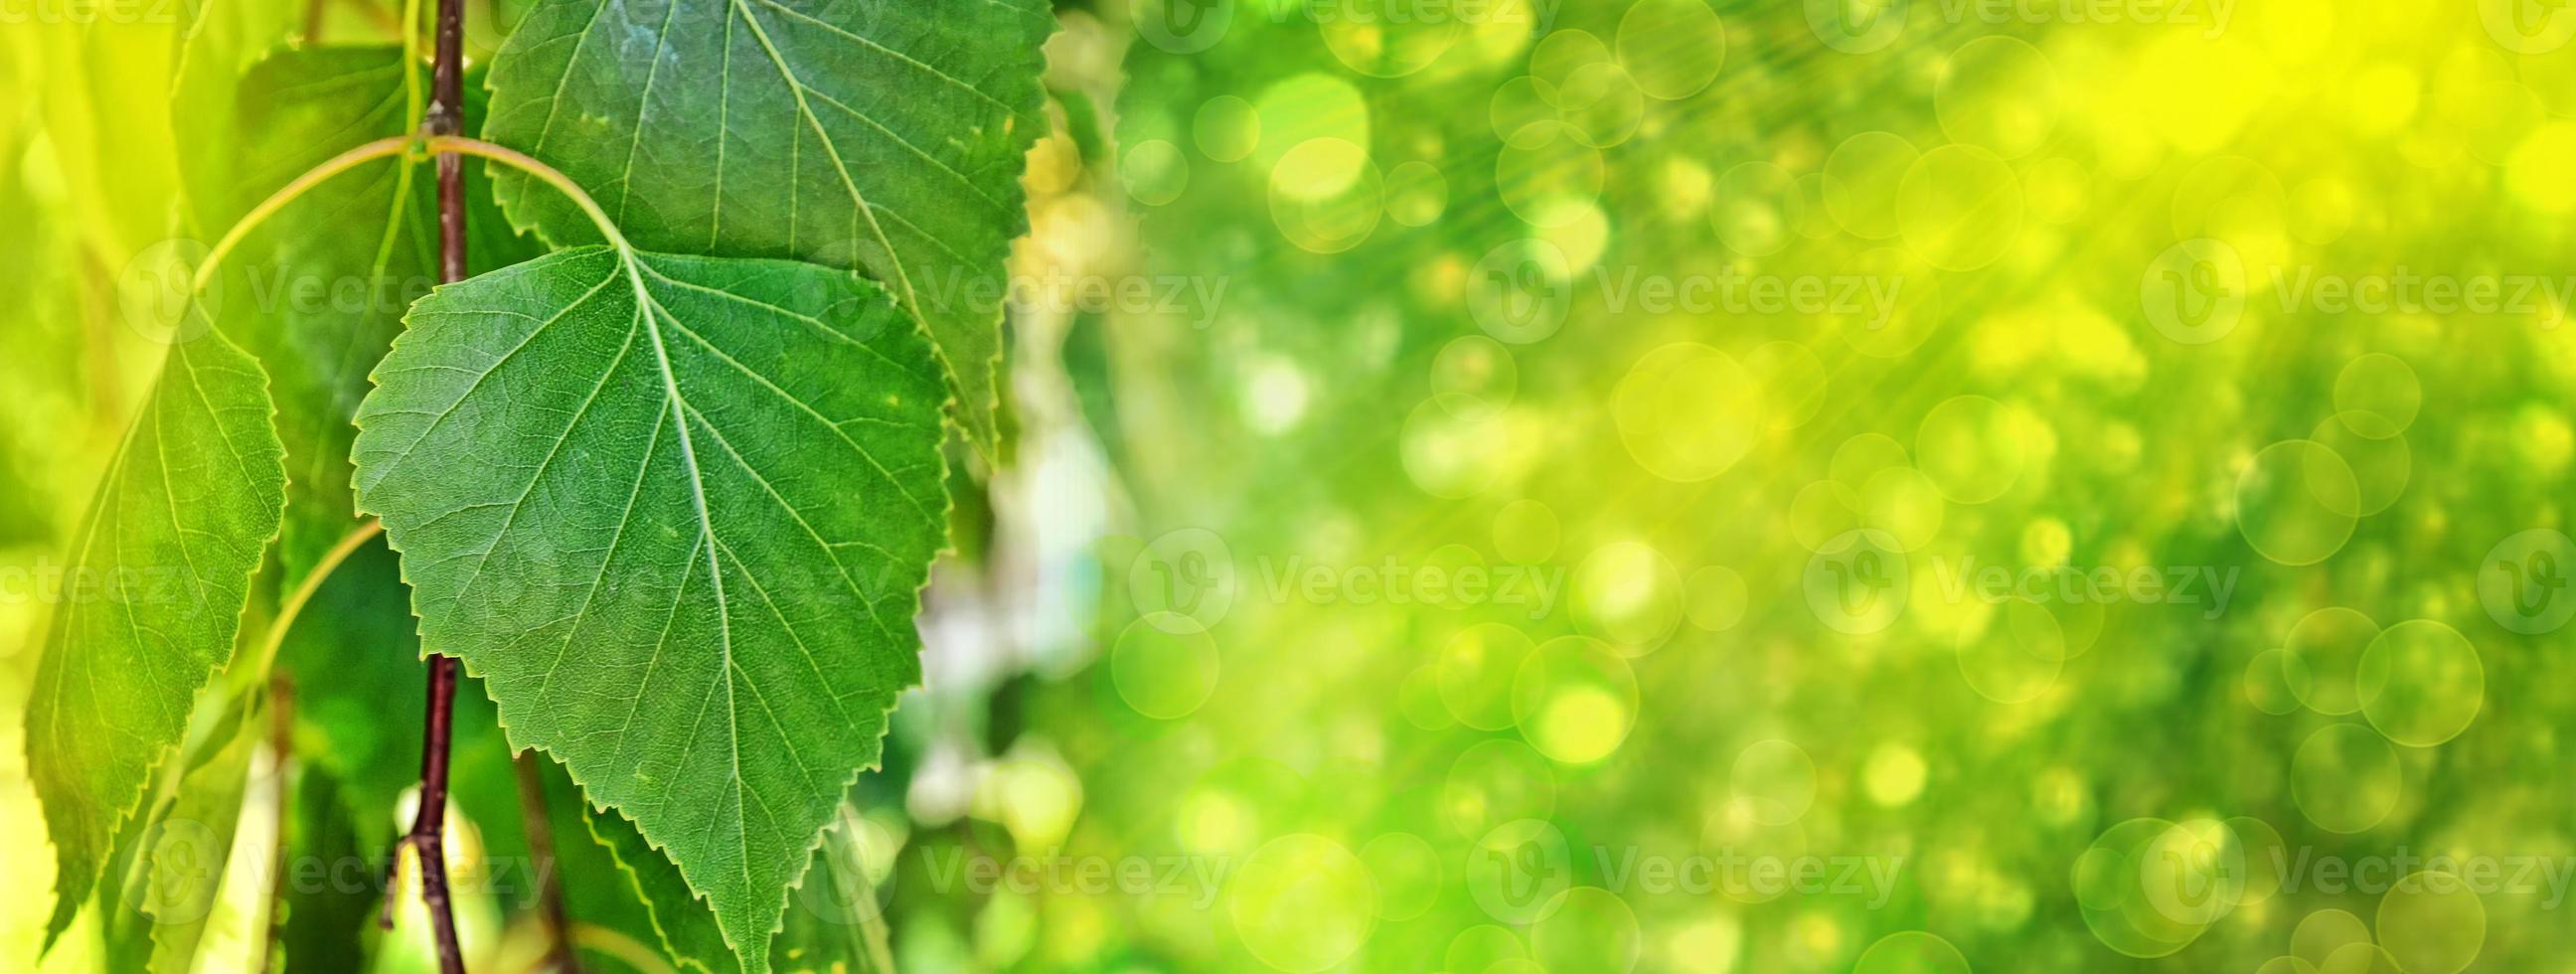 Green birch leaves on a background of the spring landscape. photo